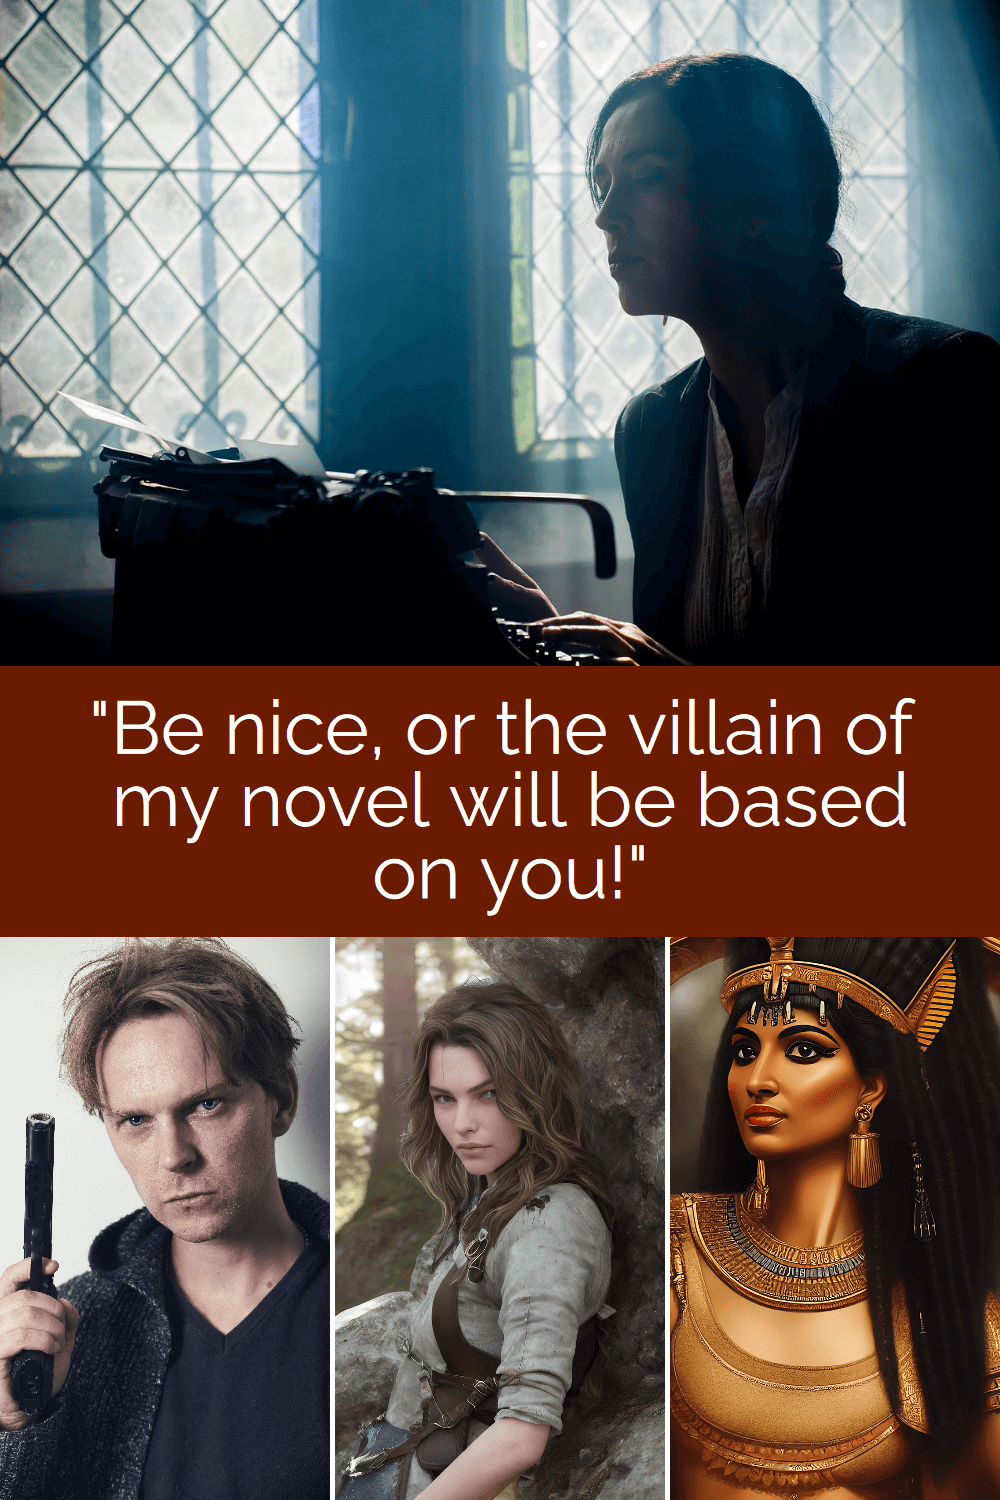 The villain of my novel may be based on you.